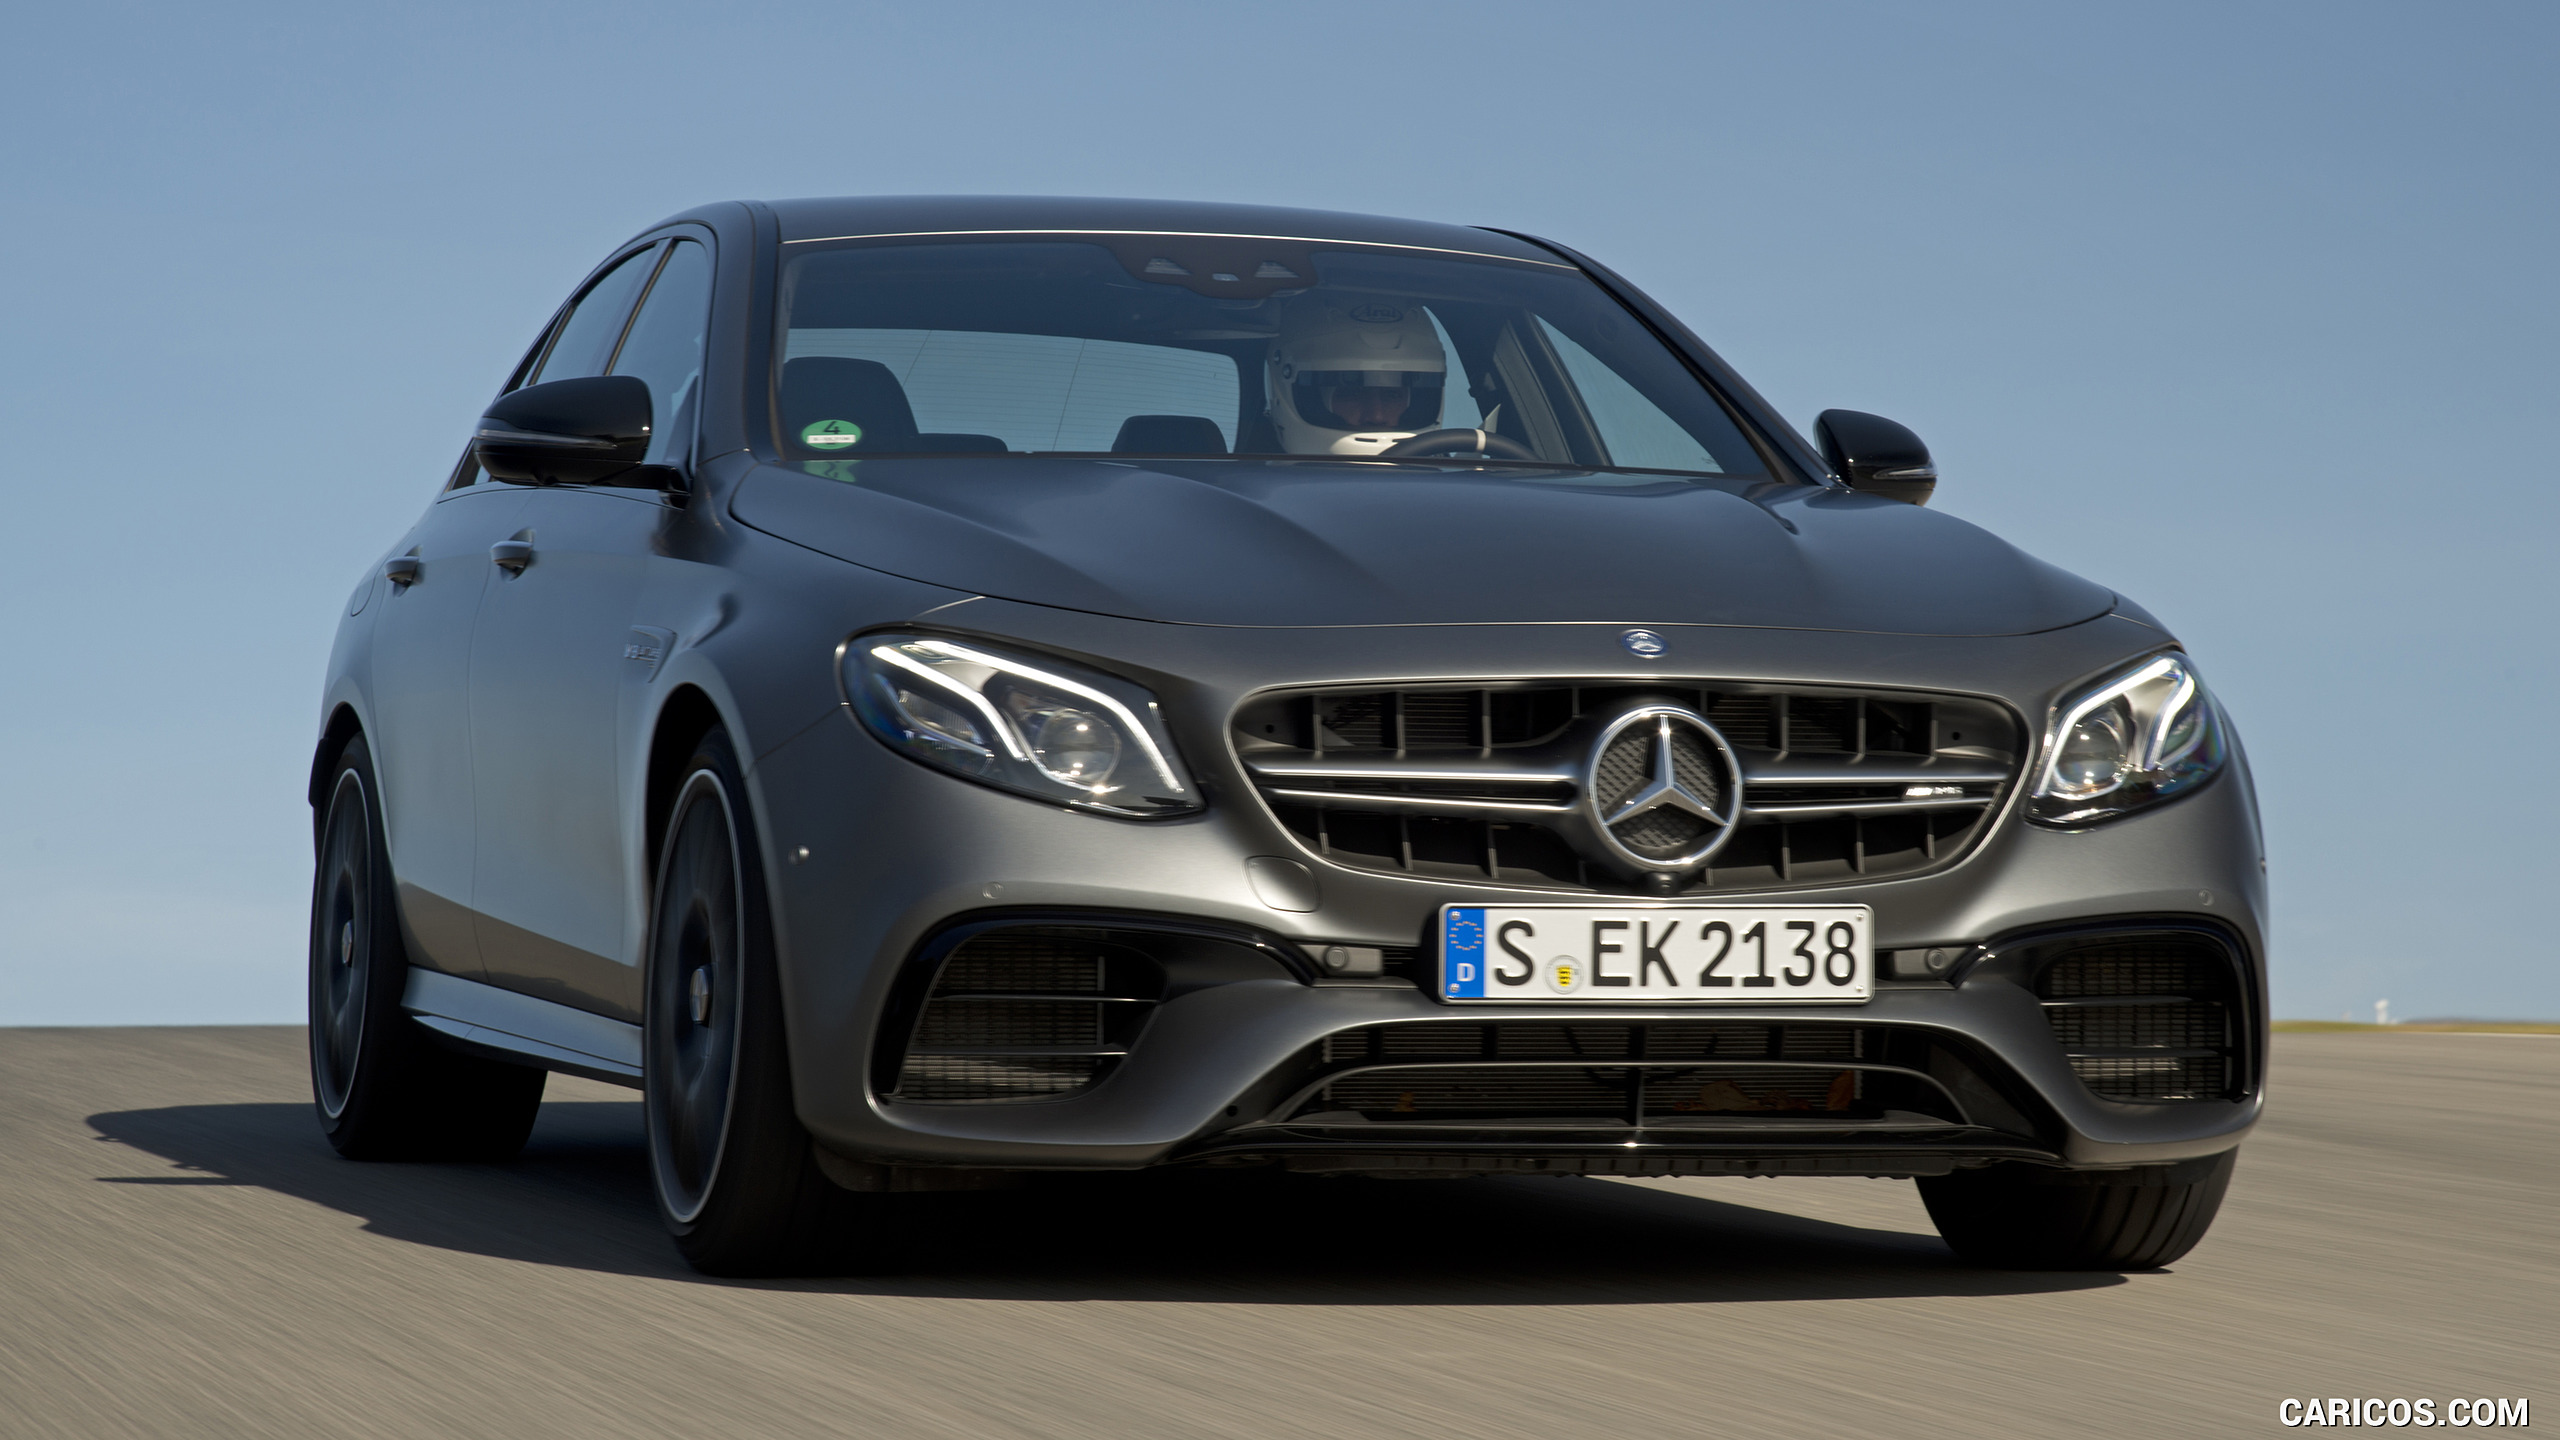 2018 Mercedes-AMG E63 S 4MATIC+ - Front, #266 of 323